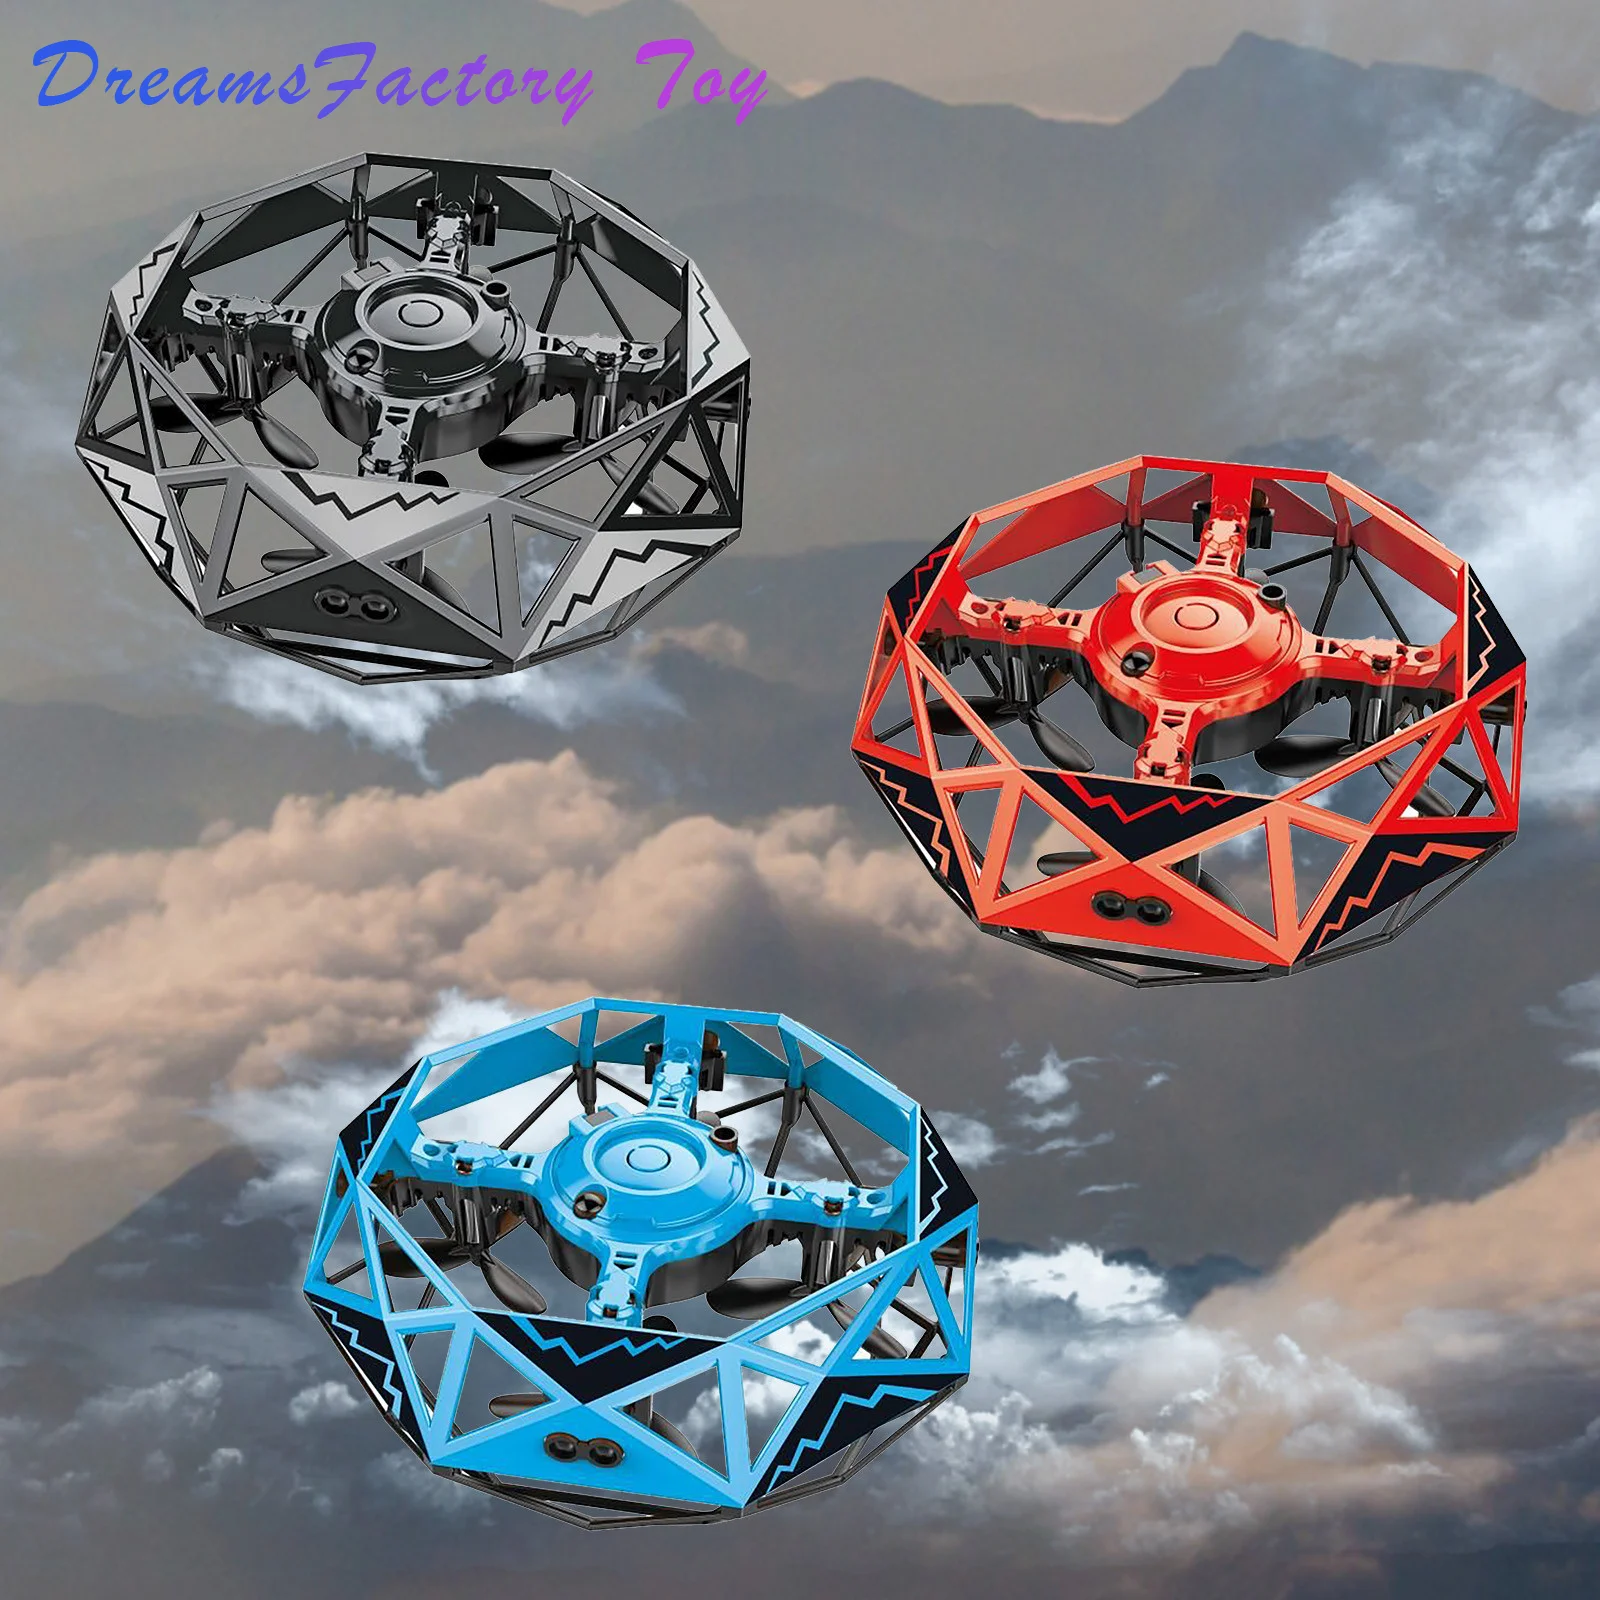 

Dron Quadcopter Toy Fall Resistant Ufo Mini Drone Toy Aircraft Intelligent Induction Juguetes Para Niños Квадрокоптер Игрушки